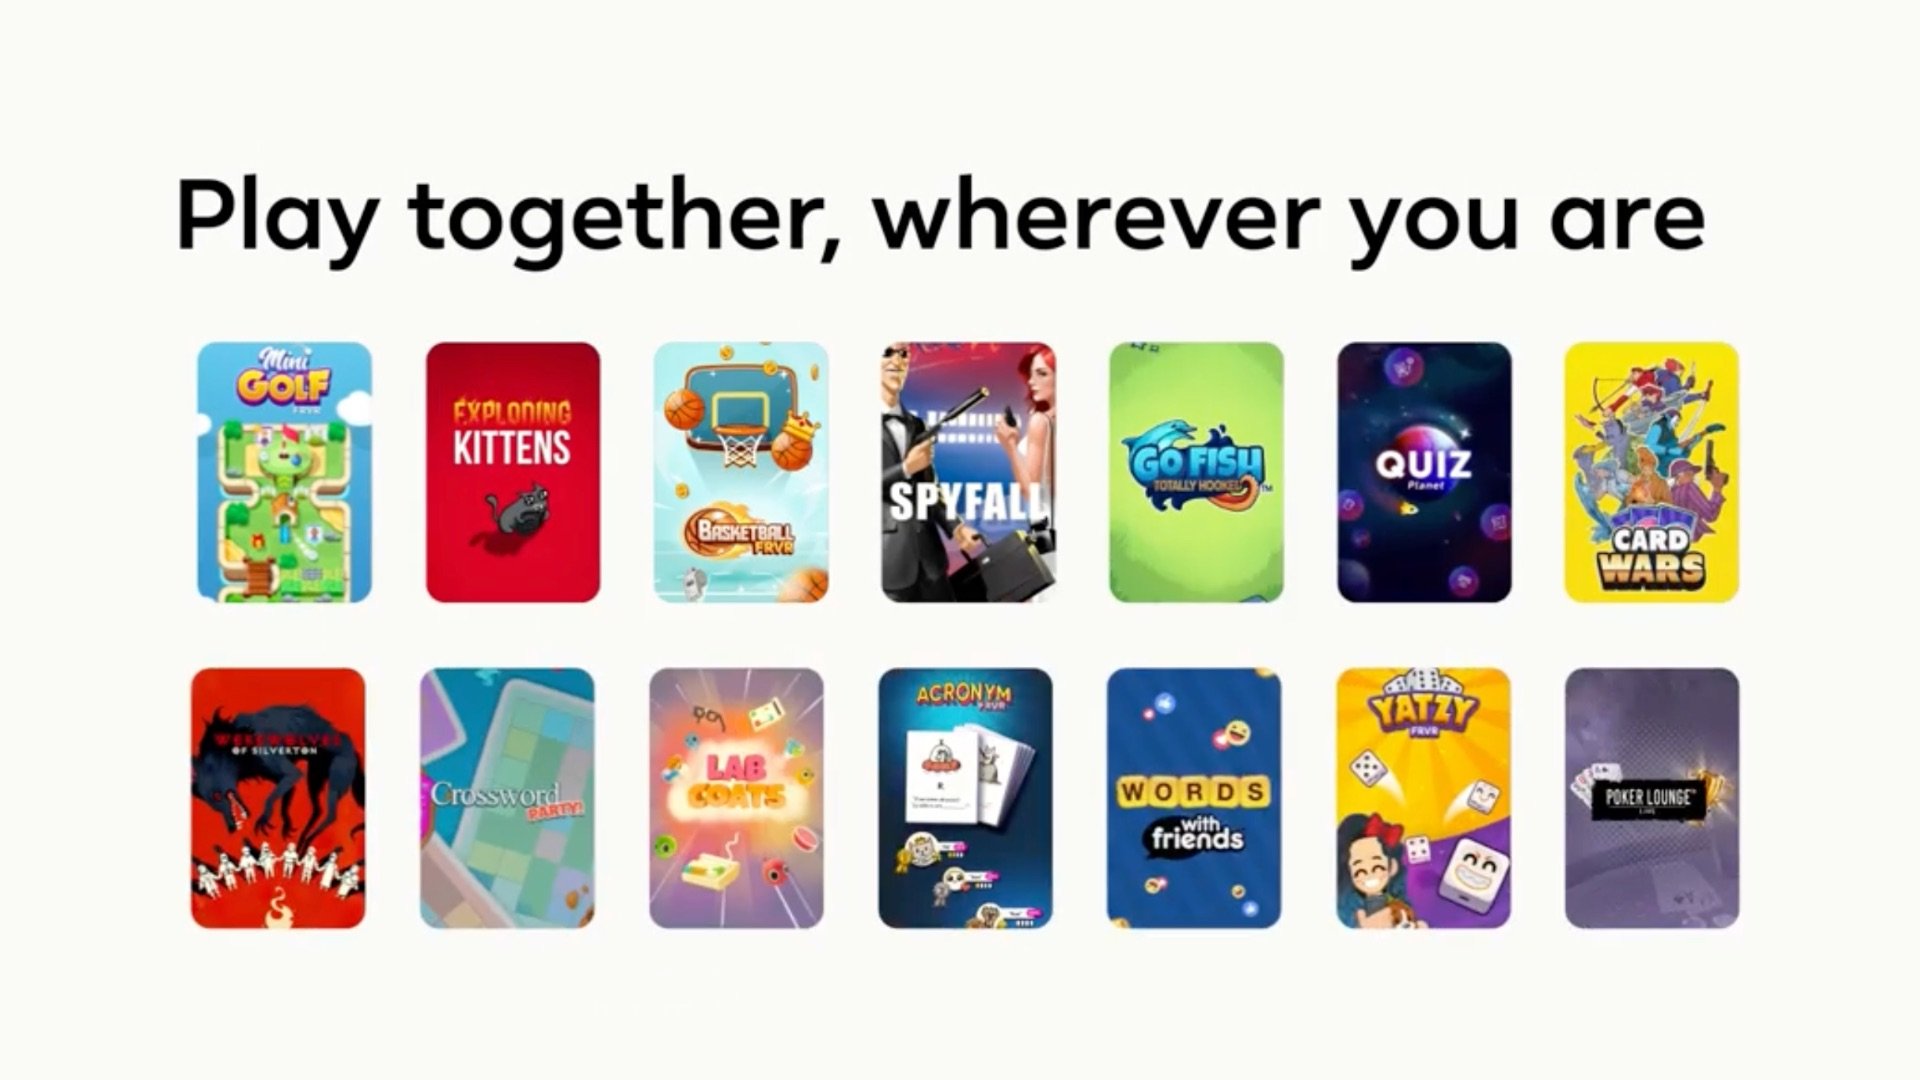 Game On: You Can Now Play Games On Messenger